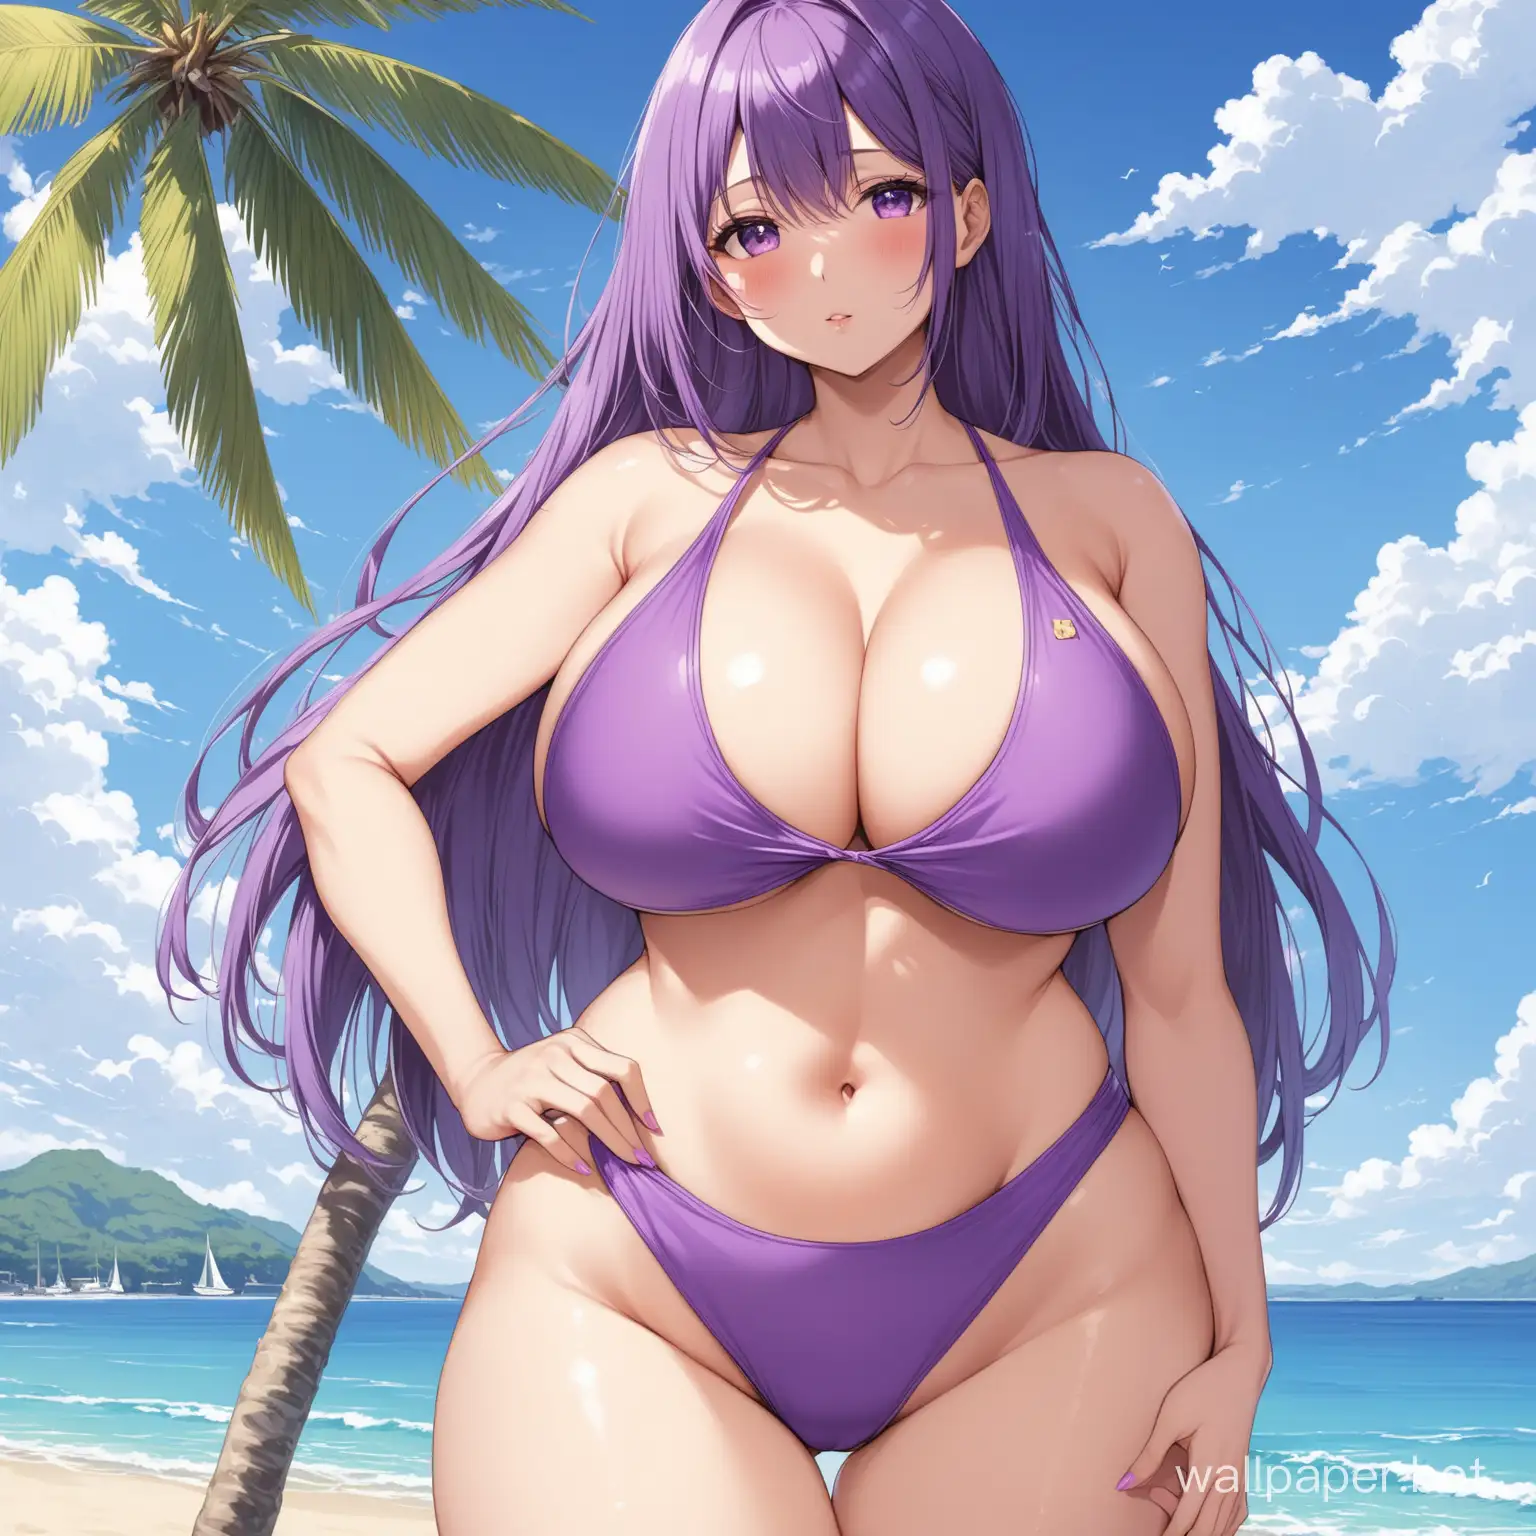 Stylish-Woman-in-Vibrant-Purple-Swimsuit-at-the-Beach